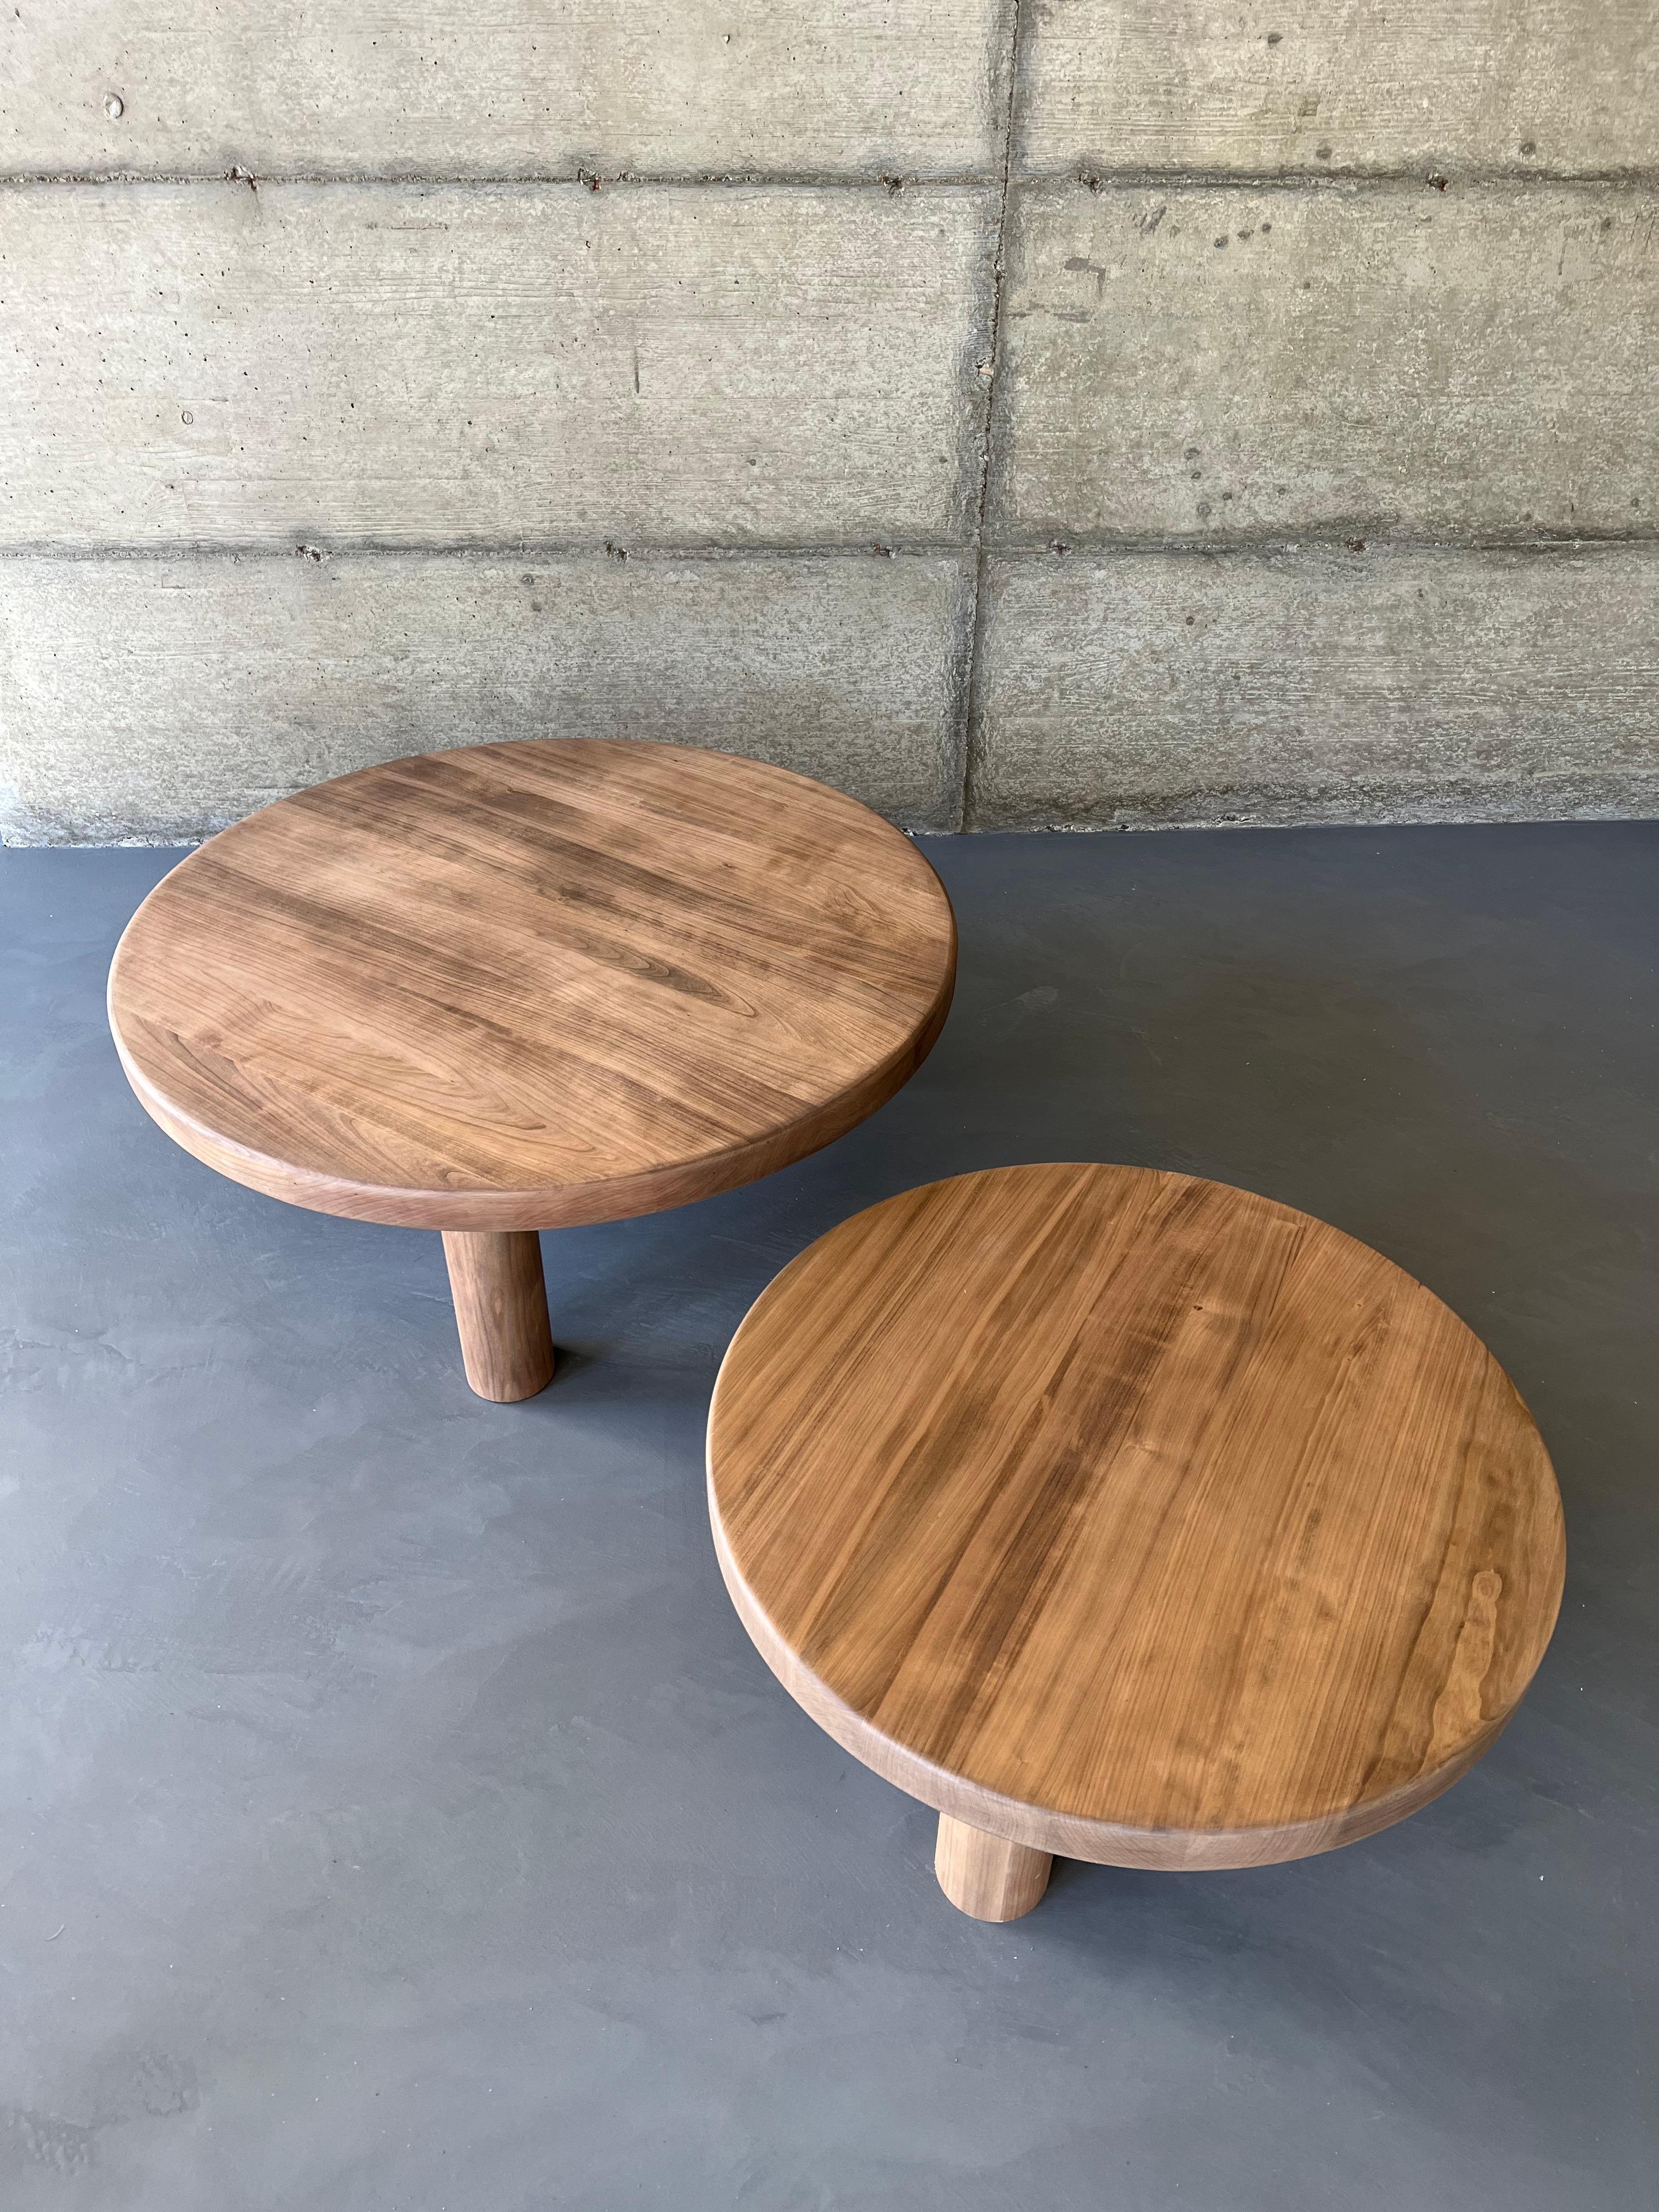 Duo of Mid-Century Style Coffee Tables in Solid Cherry Wood 5